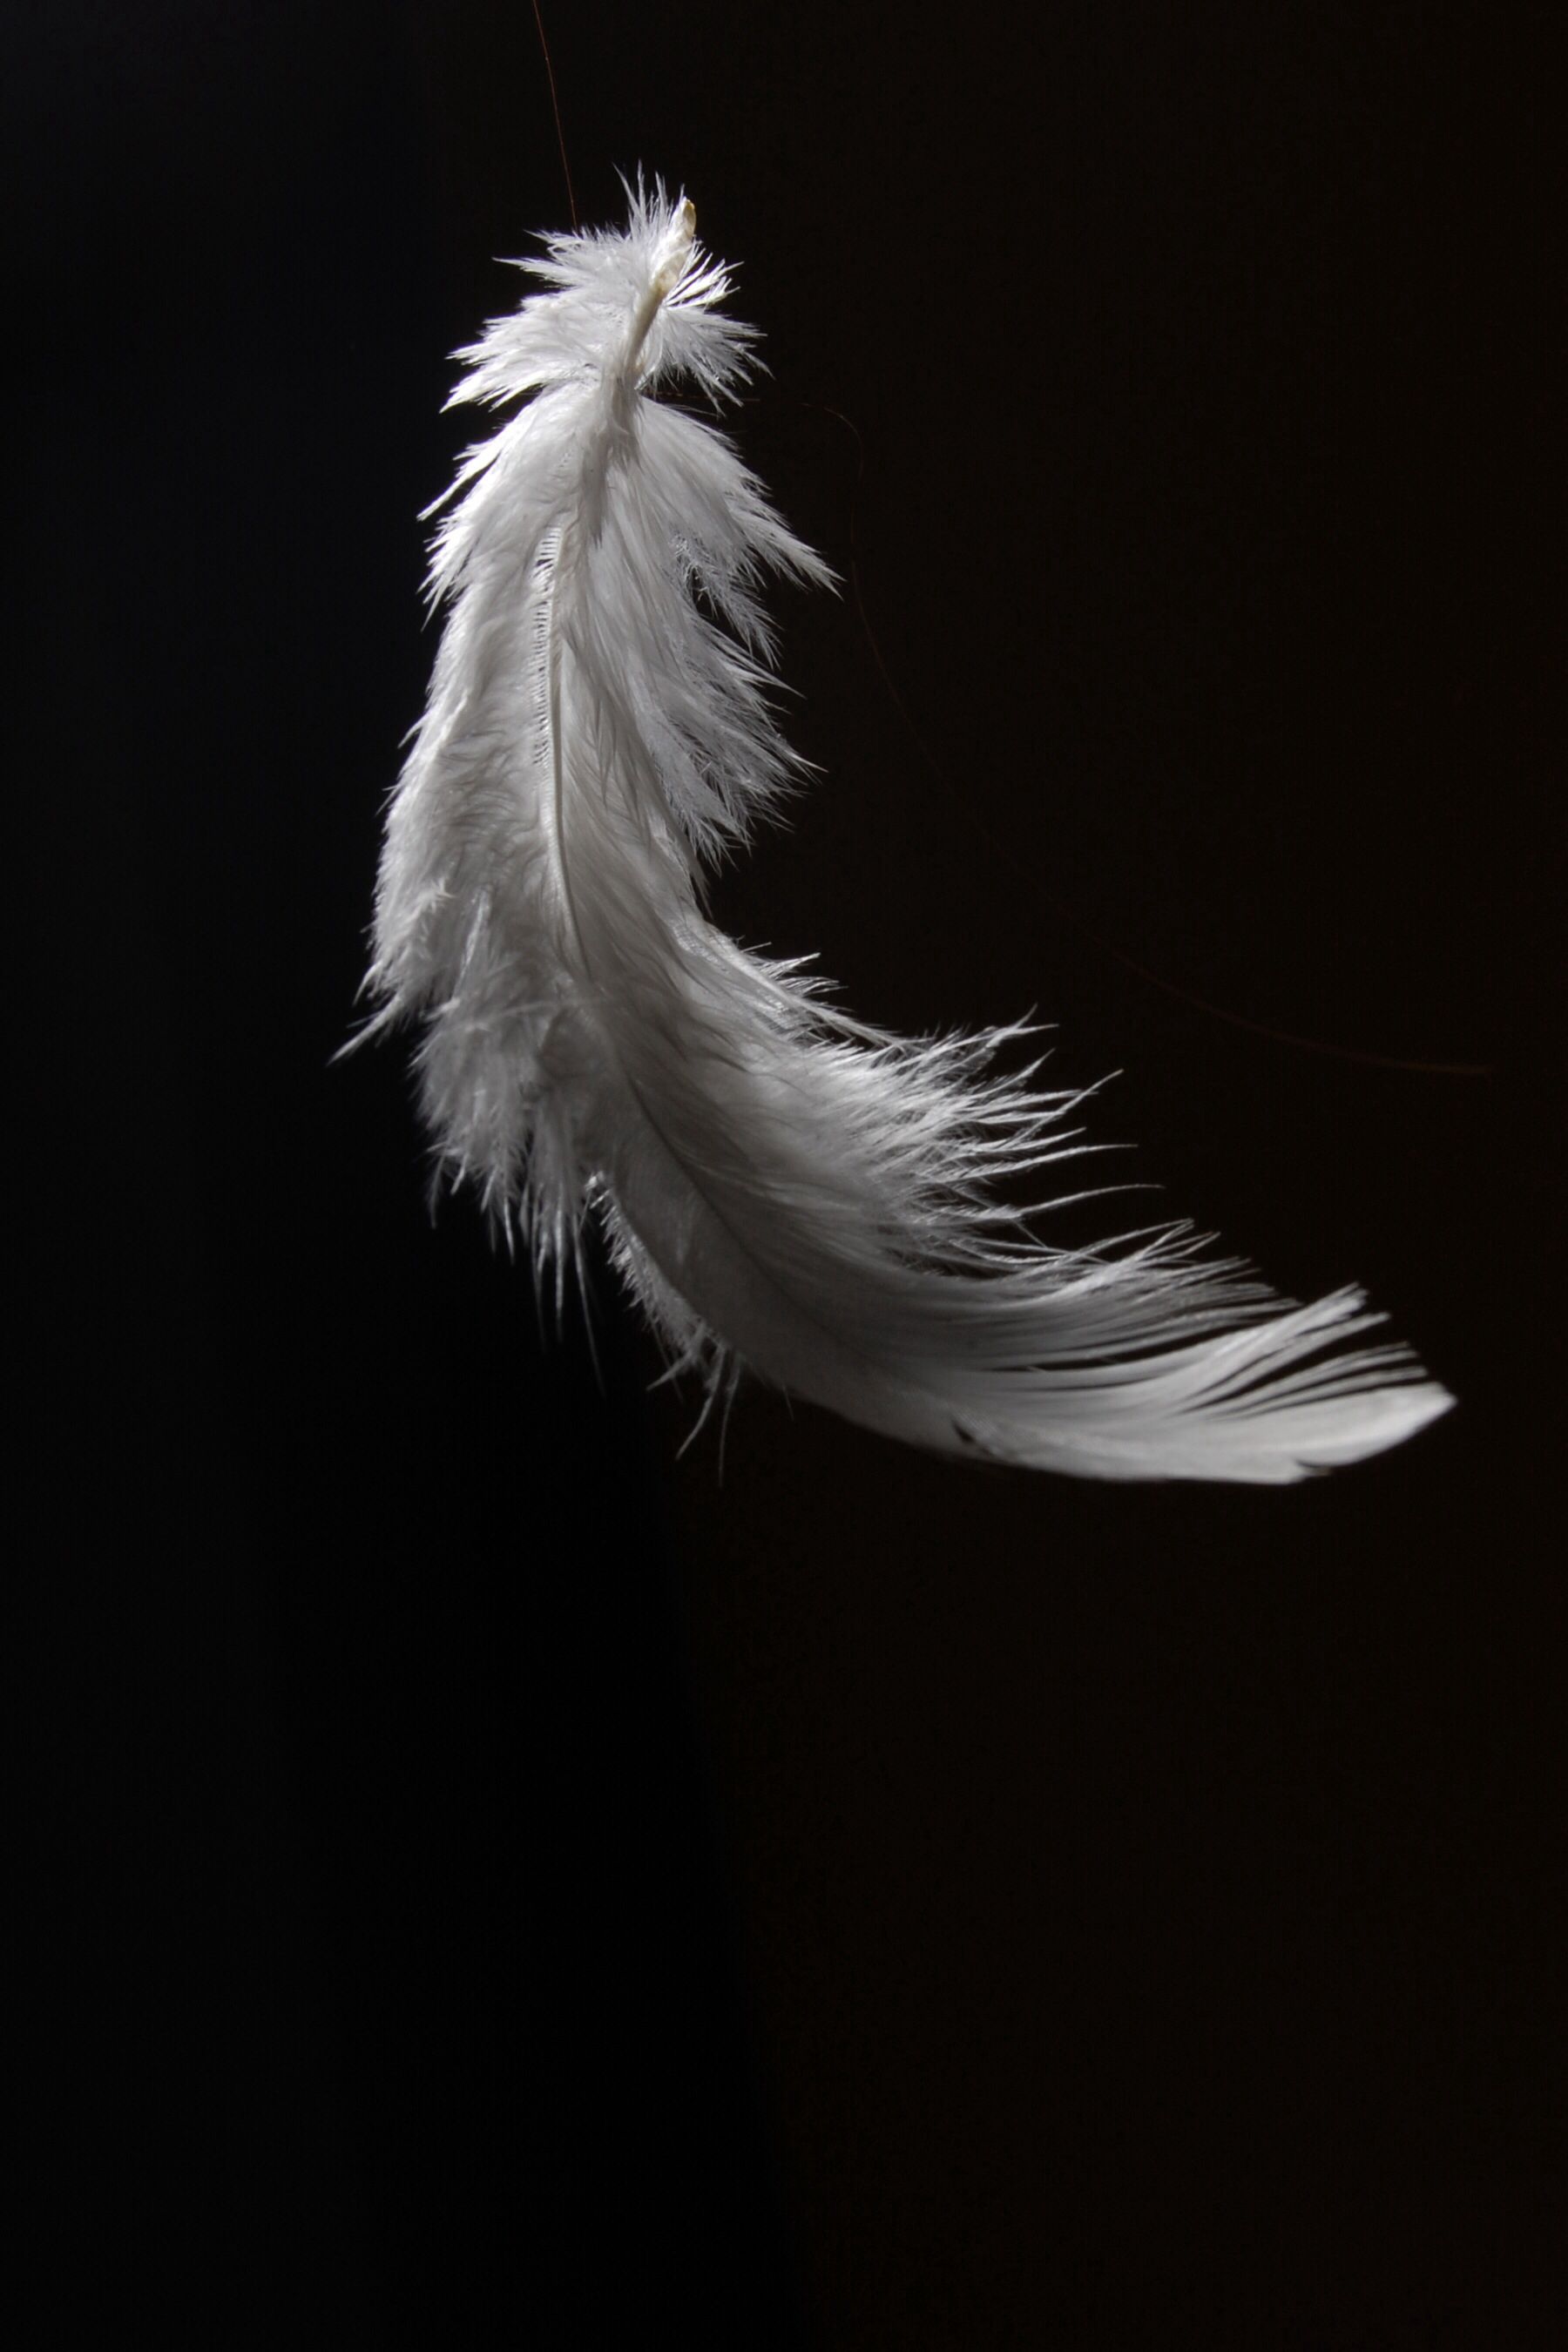 Falling feather iPhone wallpaper. Feather wallpaper, Feather photography, Feather